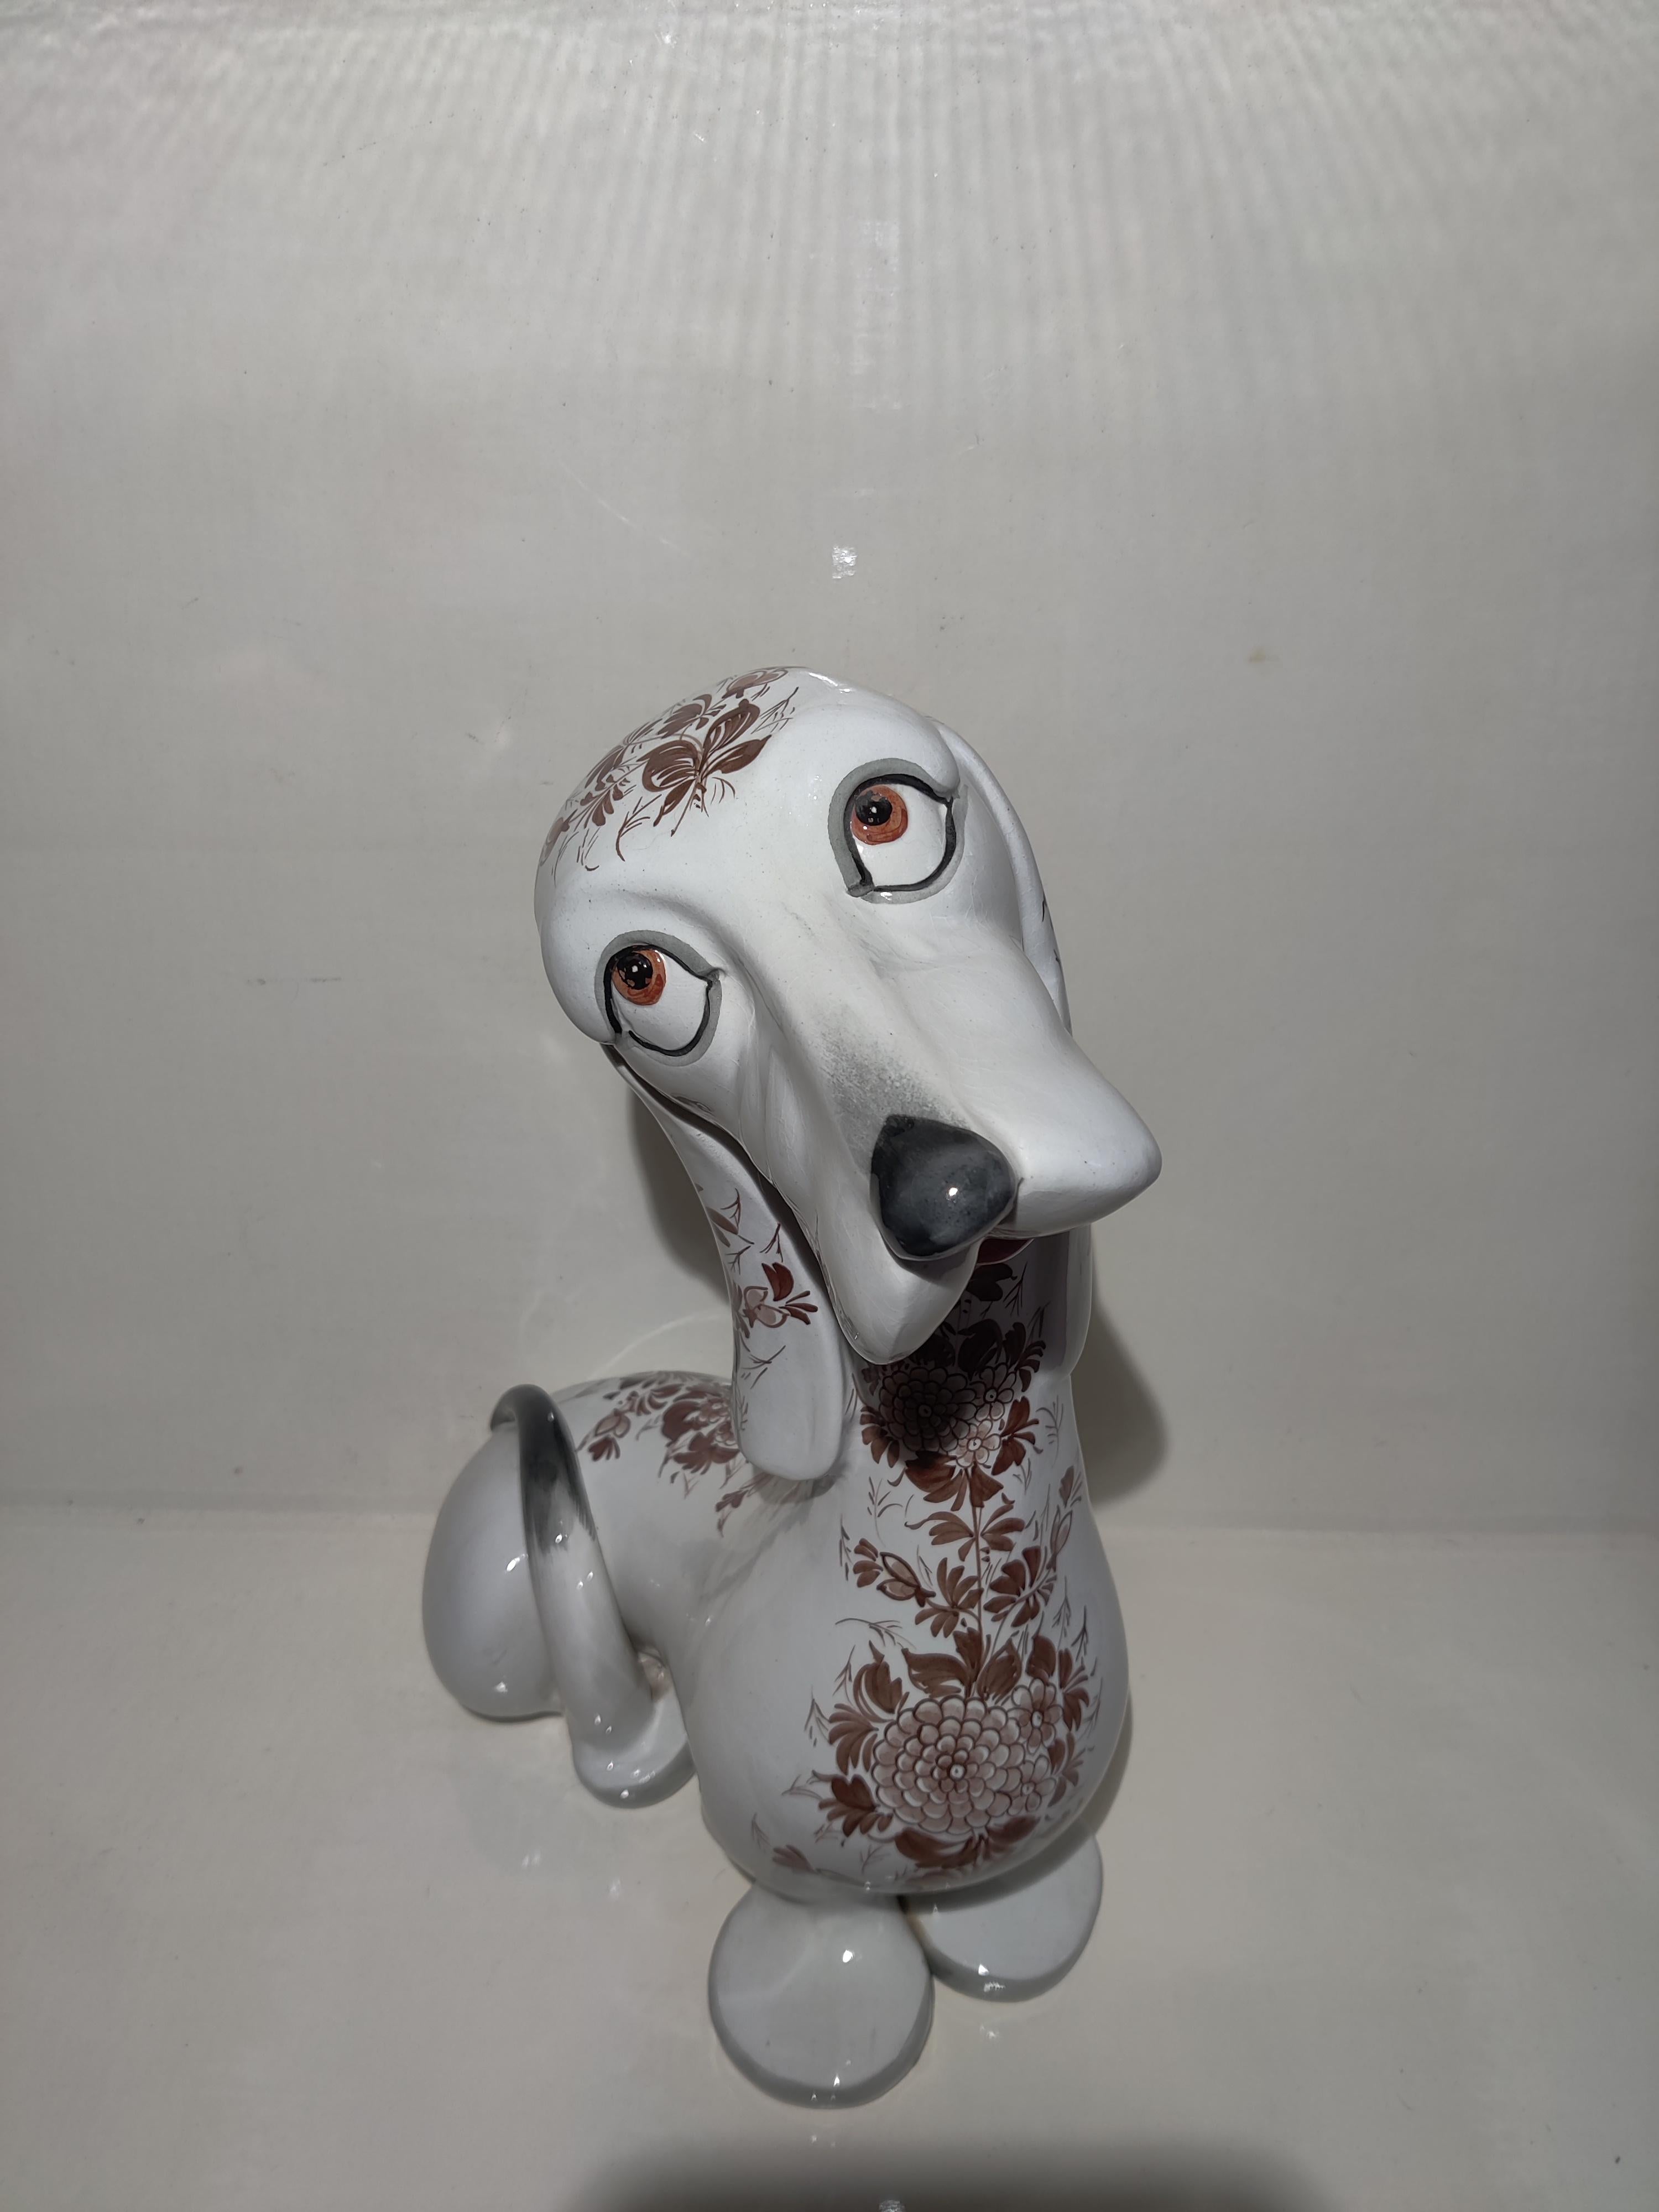 Italian Hand-Painted Life-size Dog
Made and signed Italy
Dog with sad looking eyes and large paws.
Great condition, Hand-painted, no chips.
Head dimensions W 8 x D 6
